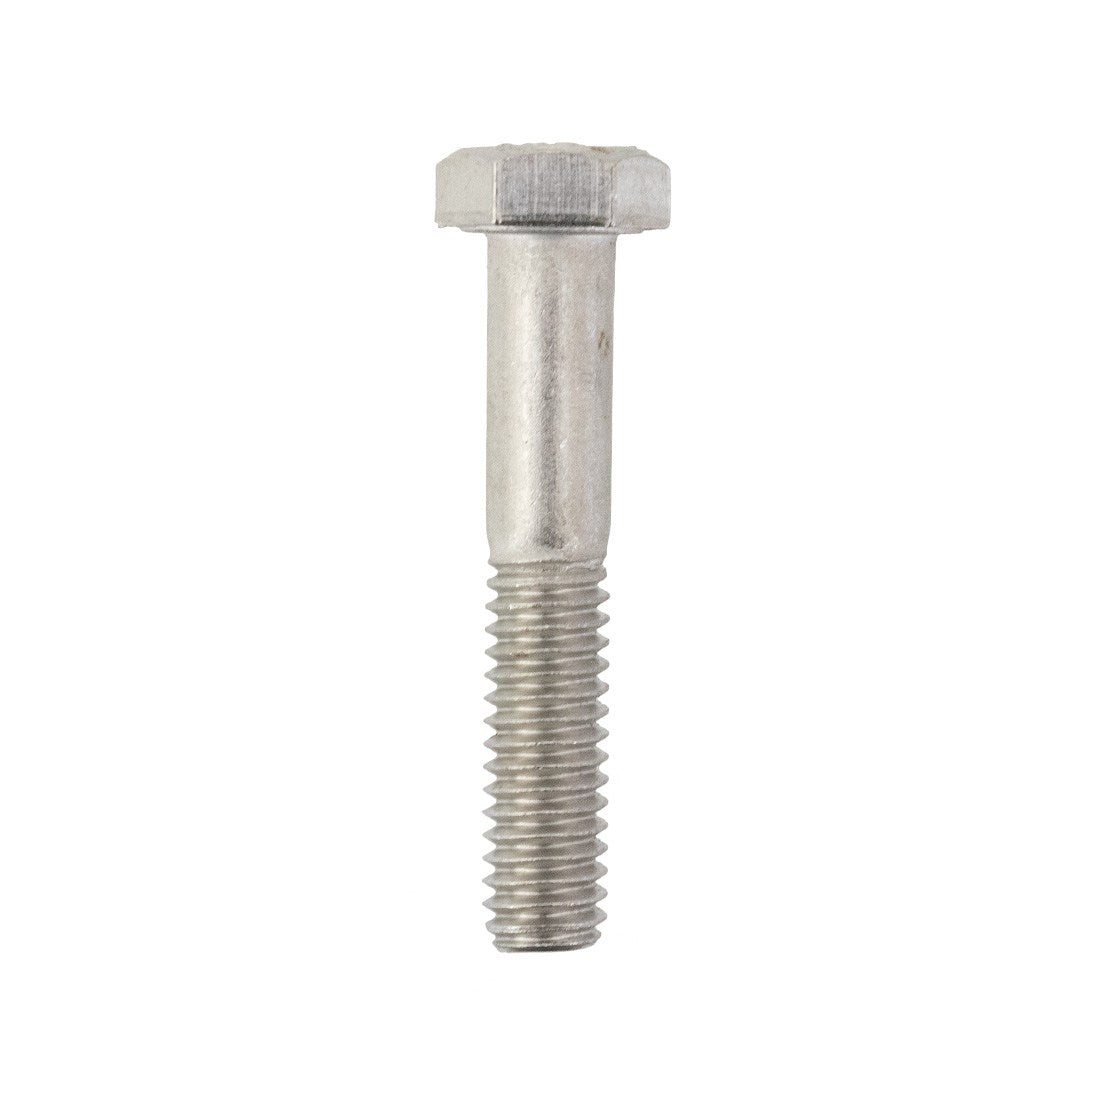 XERO Pure Hex Bolt 5/16 - 18 x 1.75 Front View